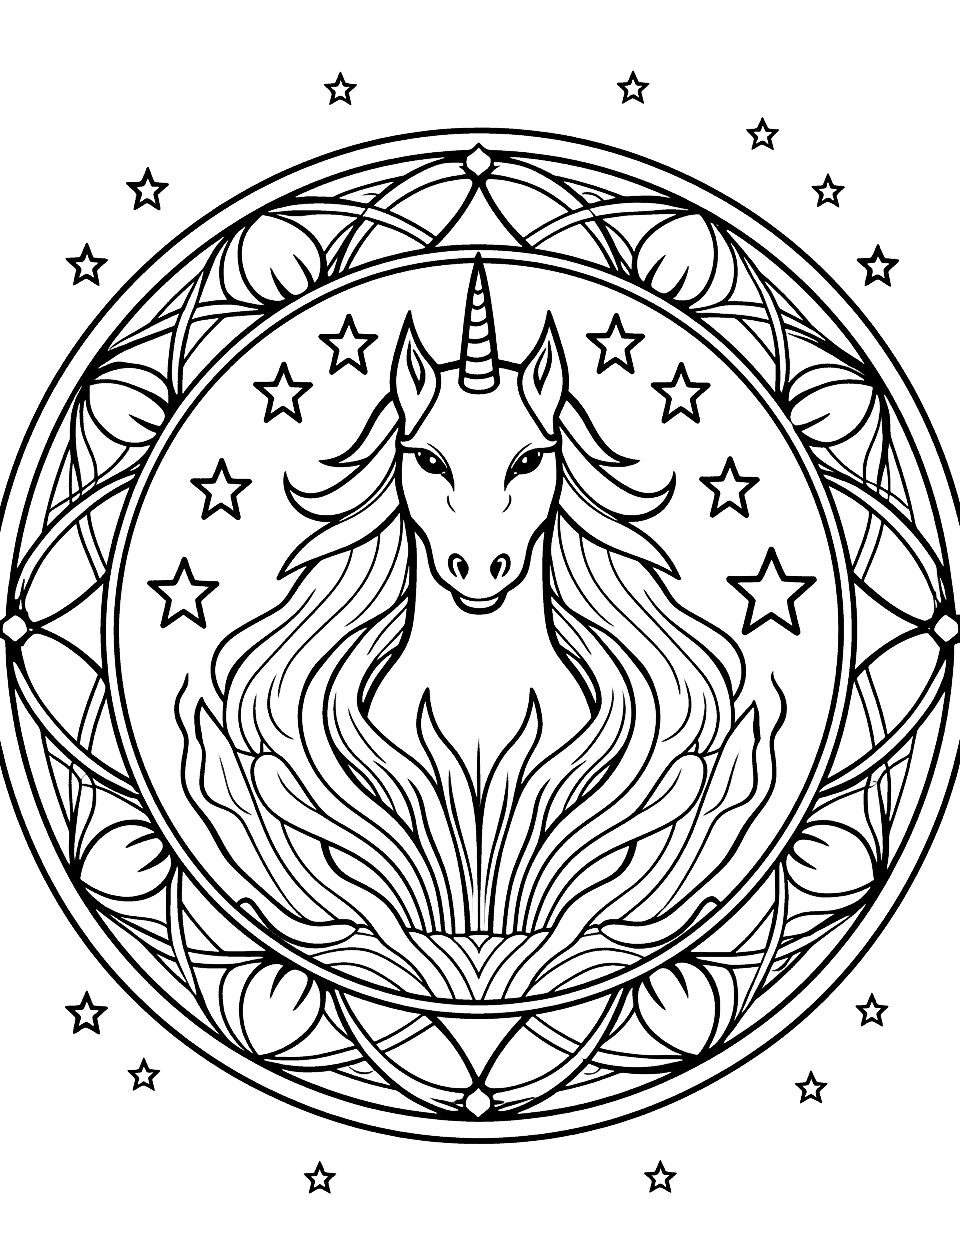 Enchanted Unicorn Mandala Coloring Page - A detailed and magical mandala featuring a unicorn in a mystical forest, surrounded by stars and moons.